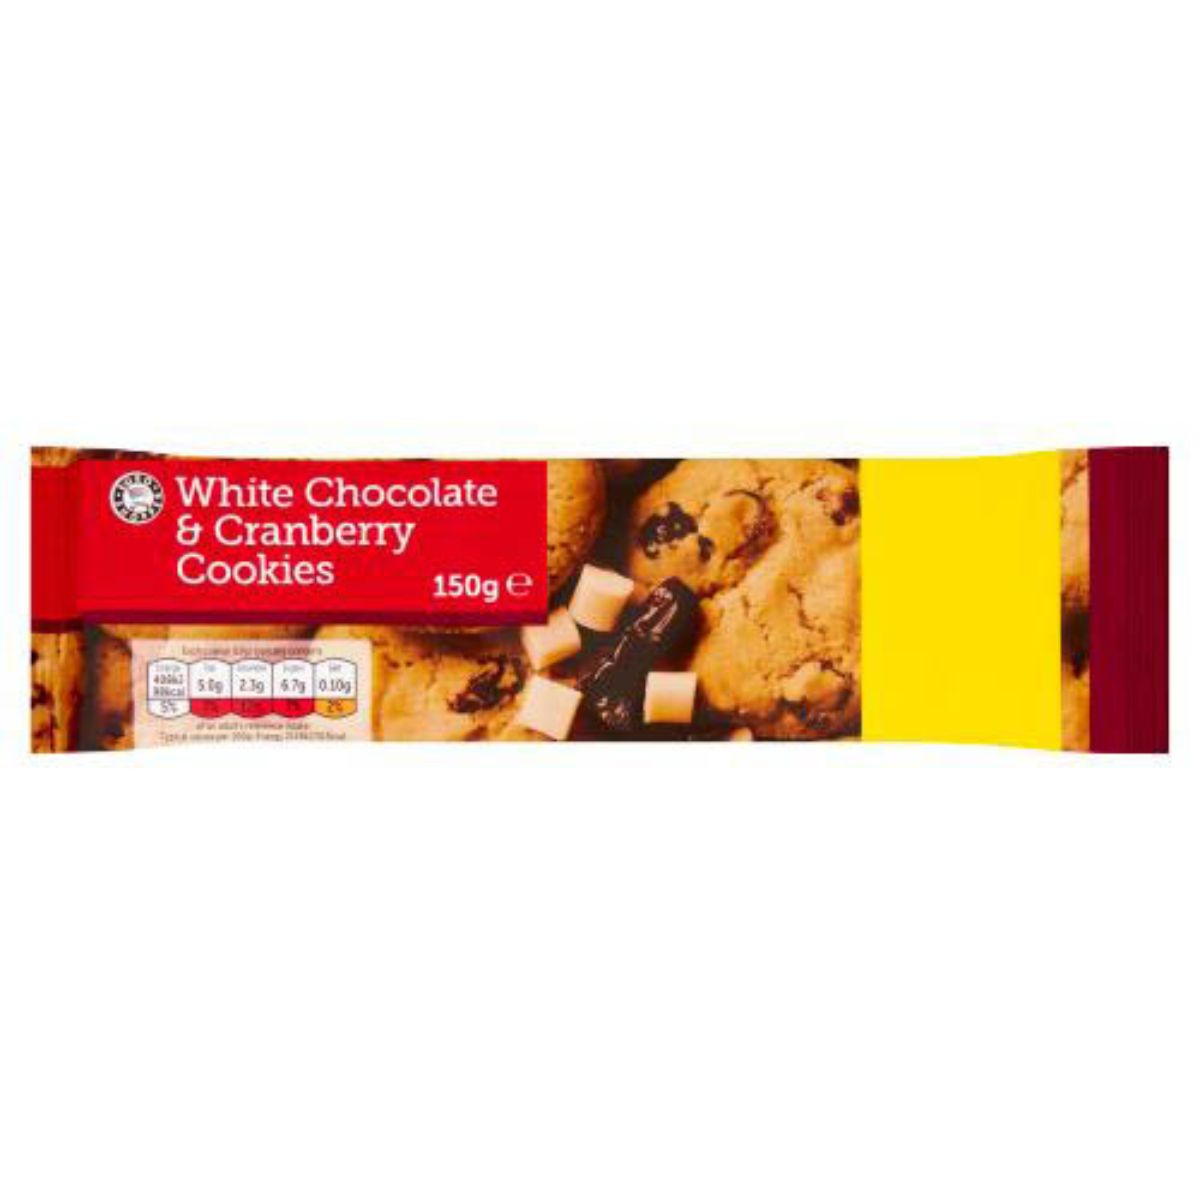 Euro Shopper - White Chocolate and Cranberry Cookies - 150g